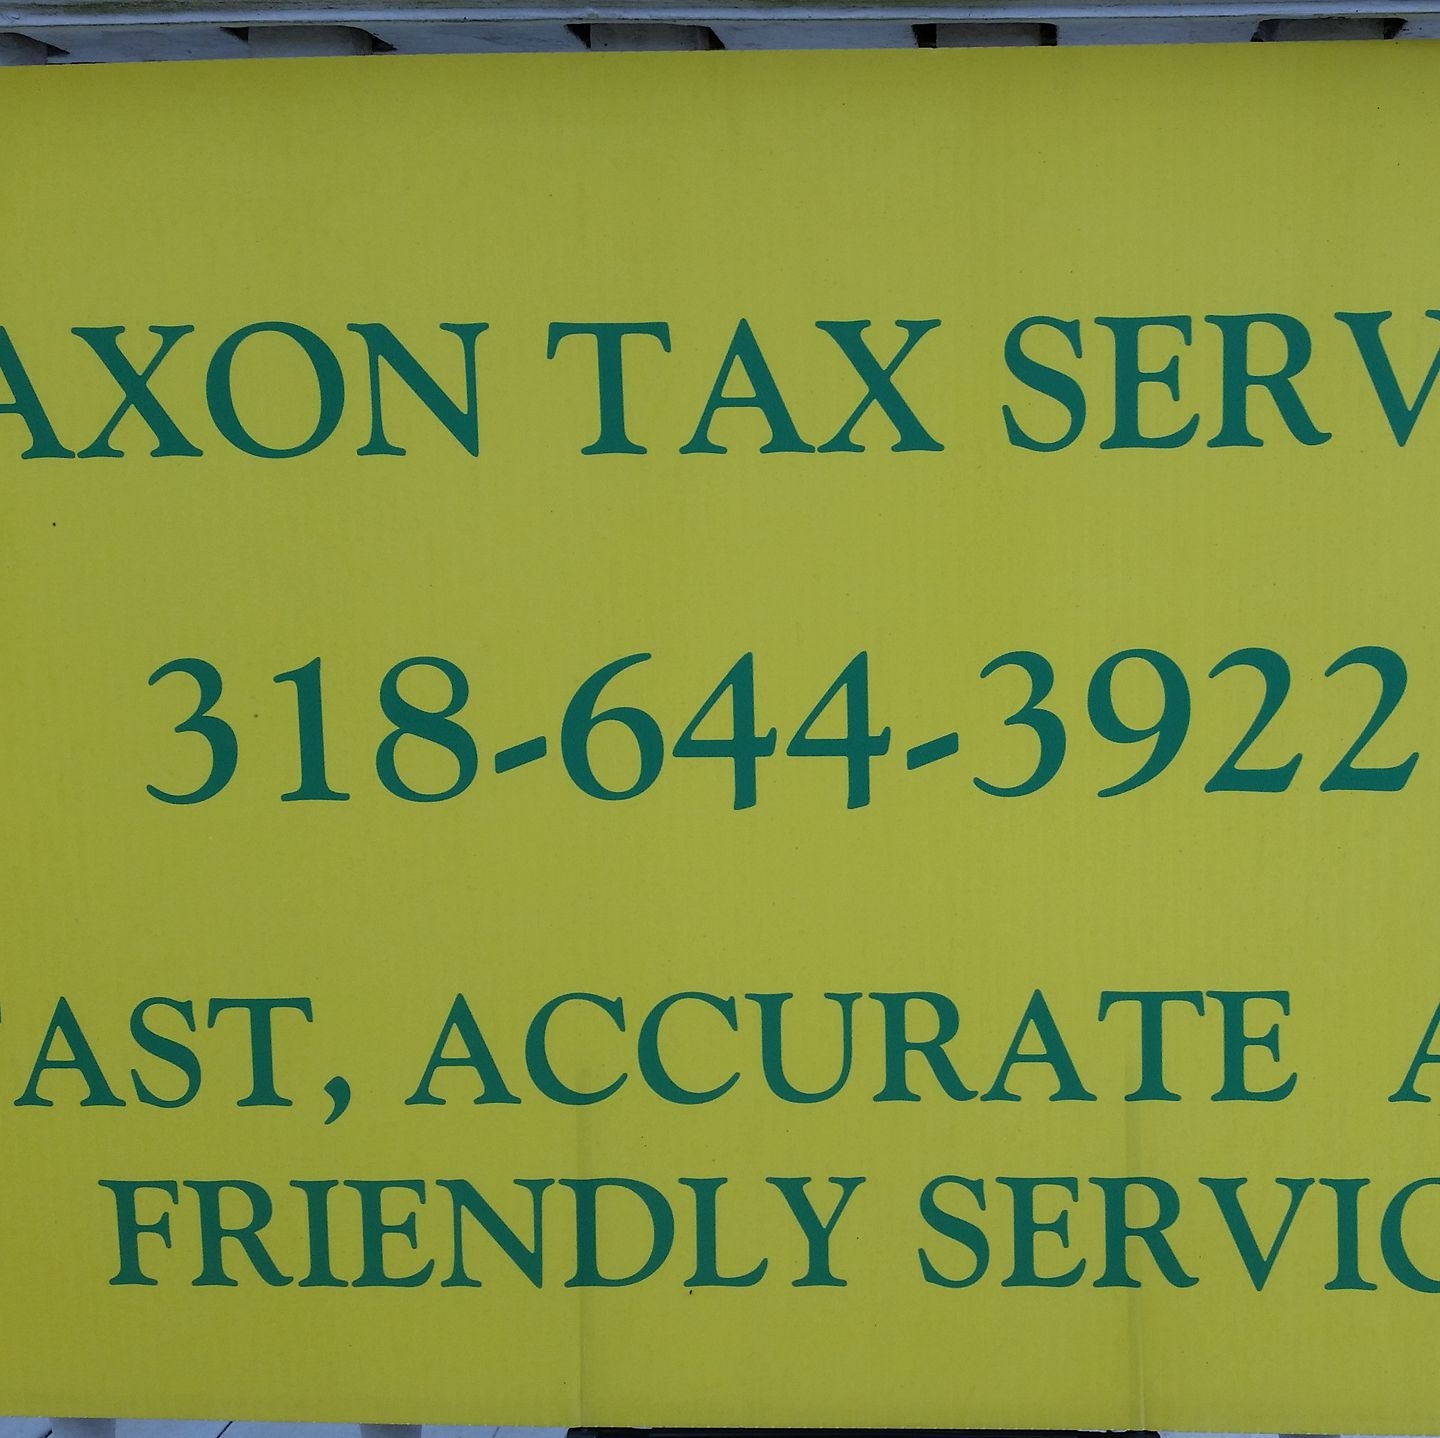 Saxon Bookkeeping & Tax Services